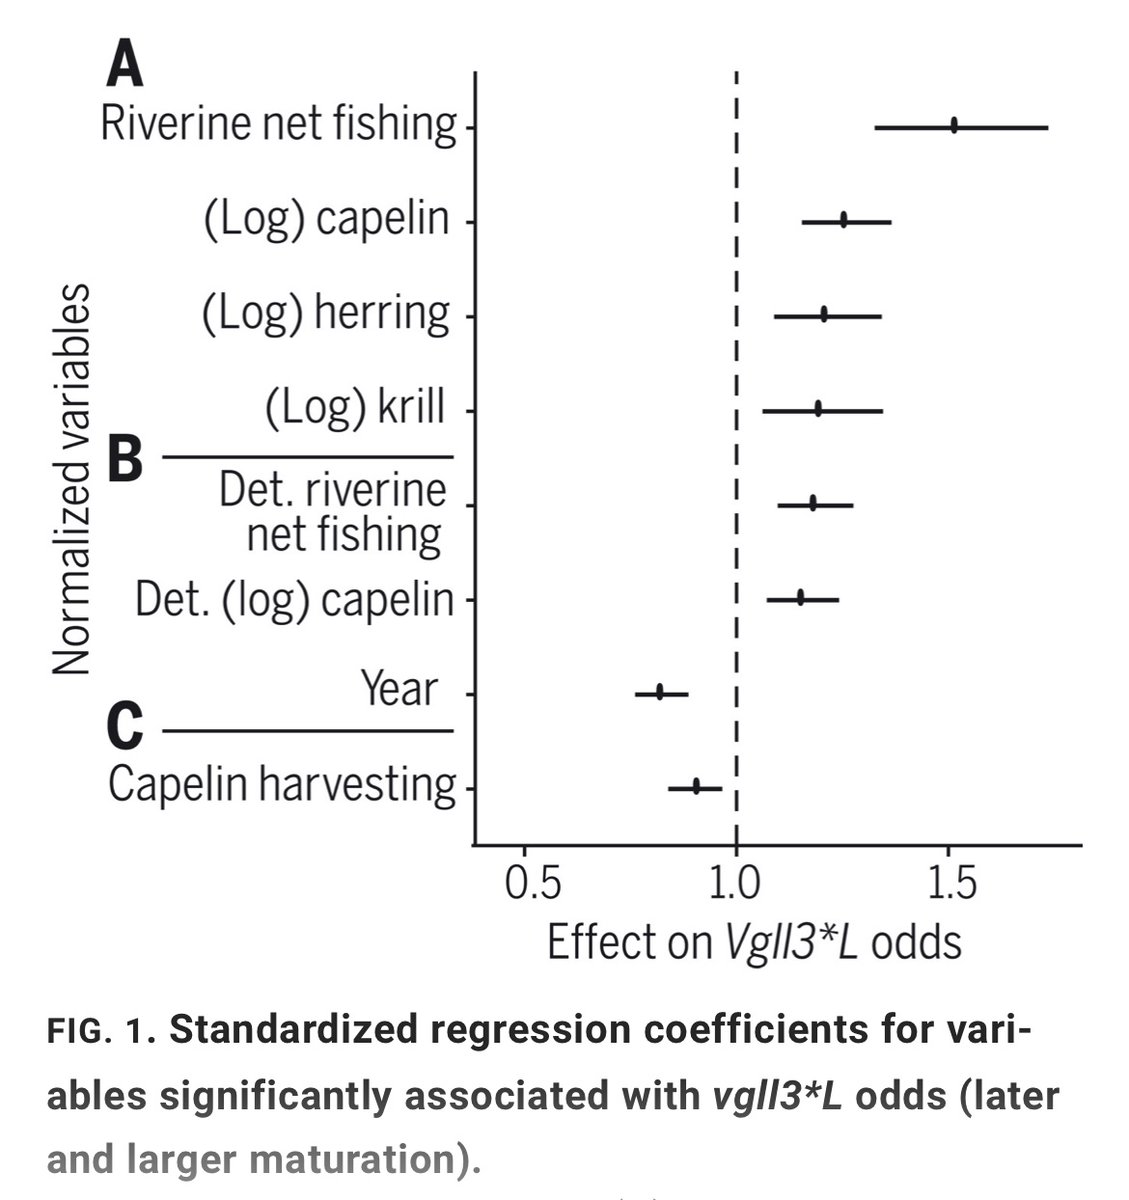 Czorlich et al. looked at native populations of Atlantic salmon and found that even indigenous fishing pressure has led to evolutionary change in these populations 

Led by Primmer, University of Helsinki

https://t.co/18jIXw1pEq https://t.co/LwdpUXd8fd